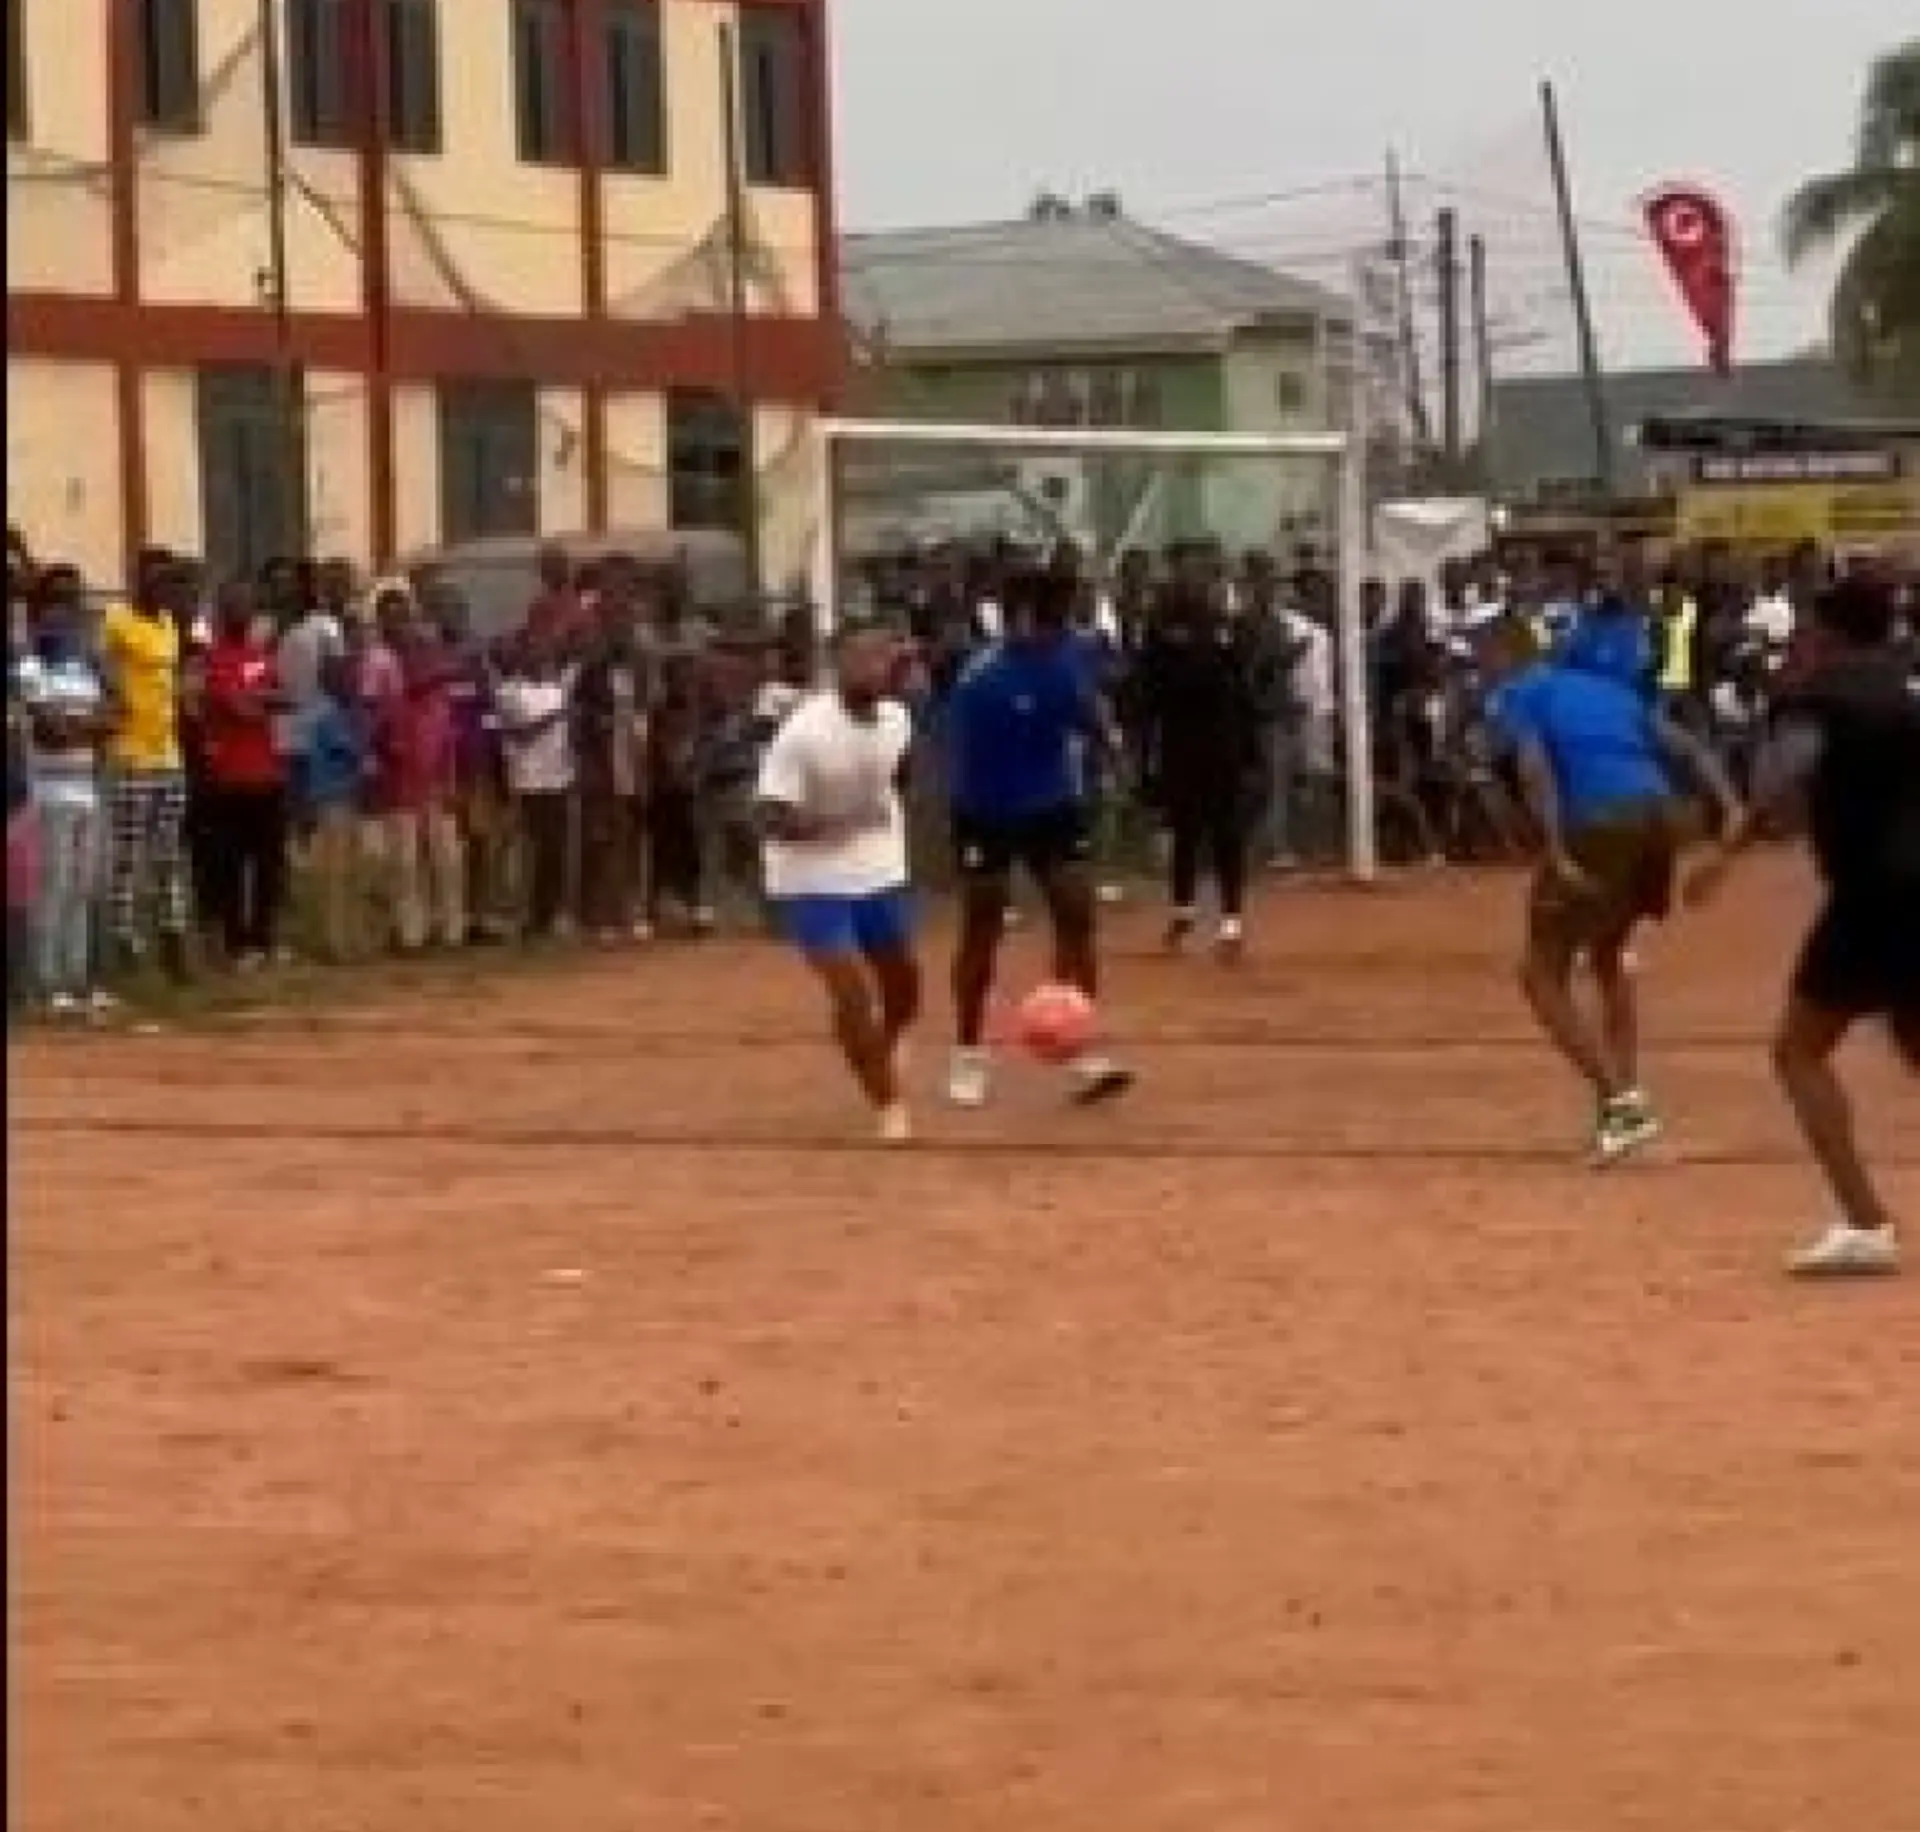 358496a1 2177 4c44 bb71 e651e1d5a9c3?width=1920&quality=75 Memphis Depay spotted playing street football in Ghana